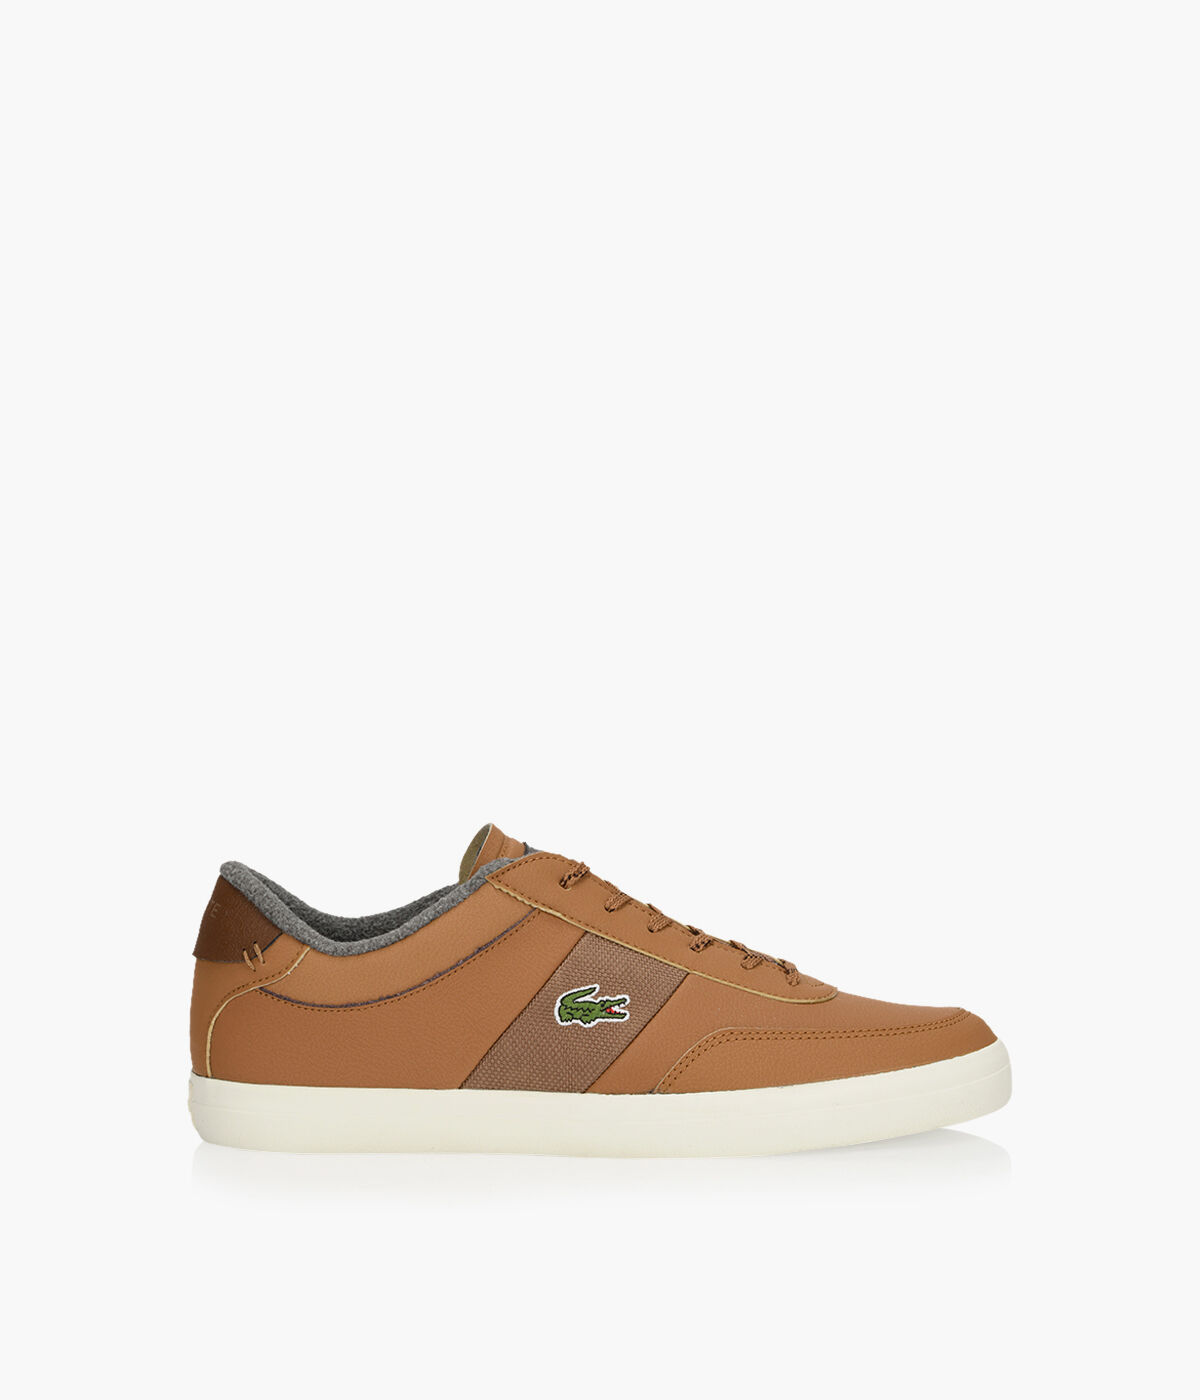 lacoste brown leather shoes